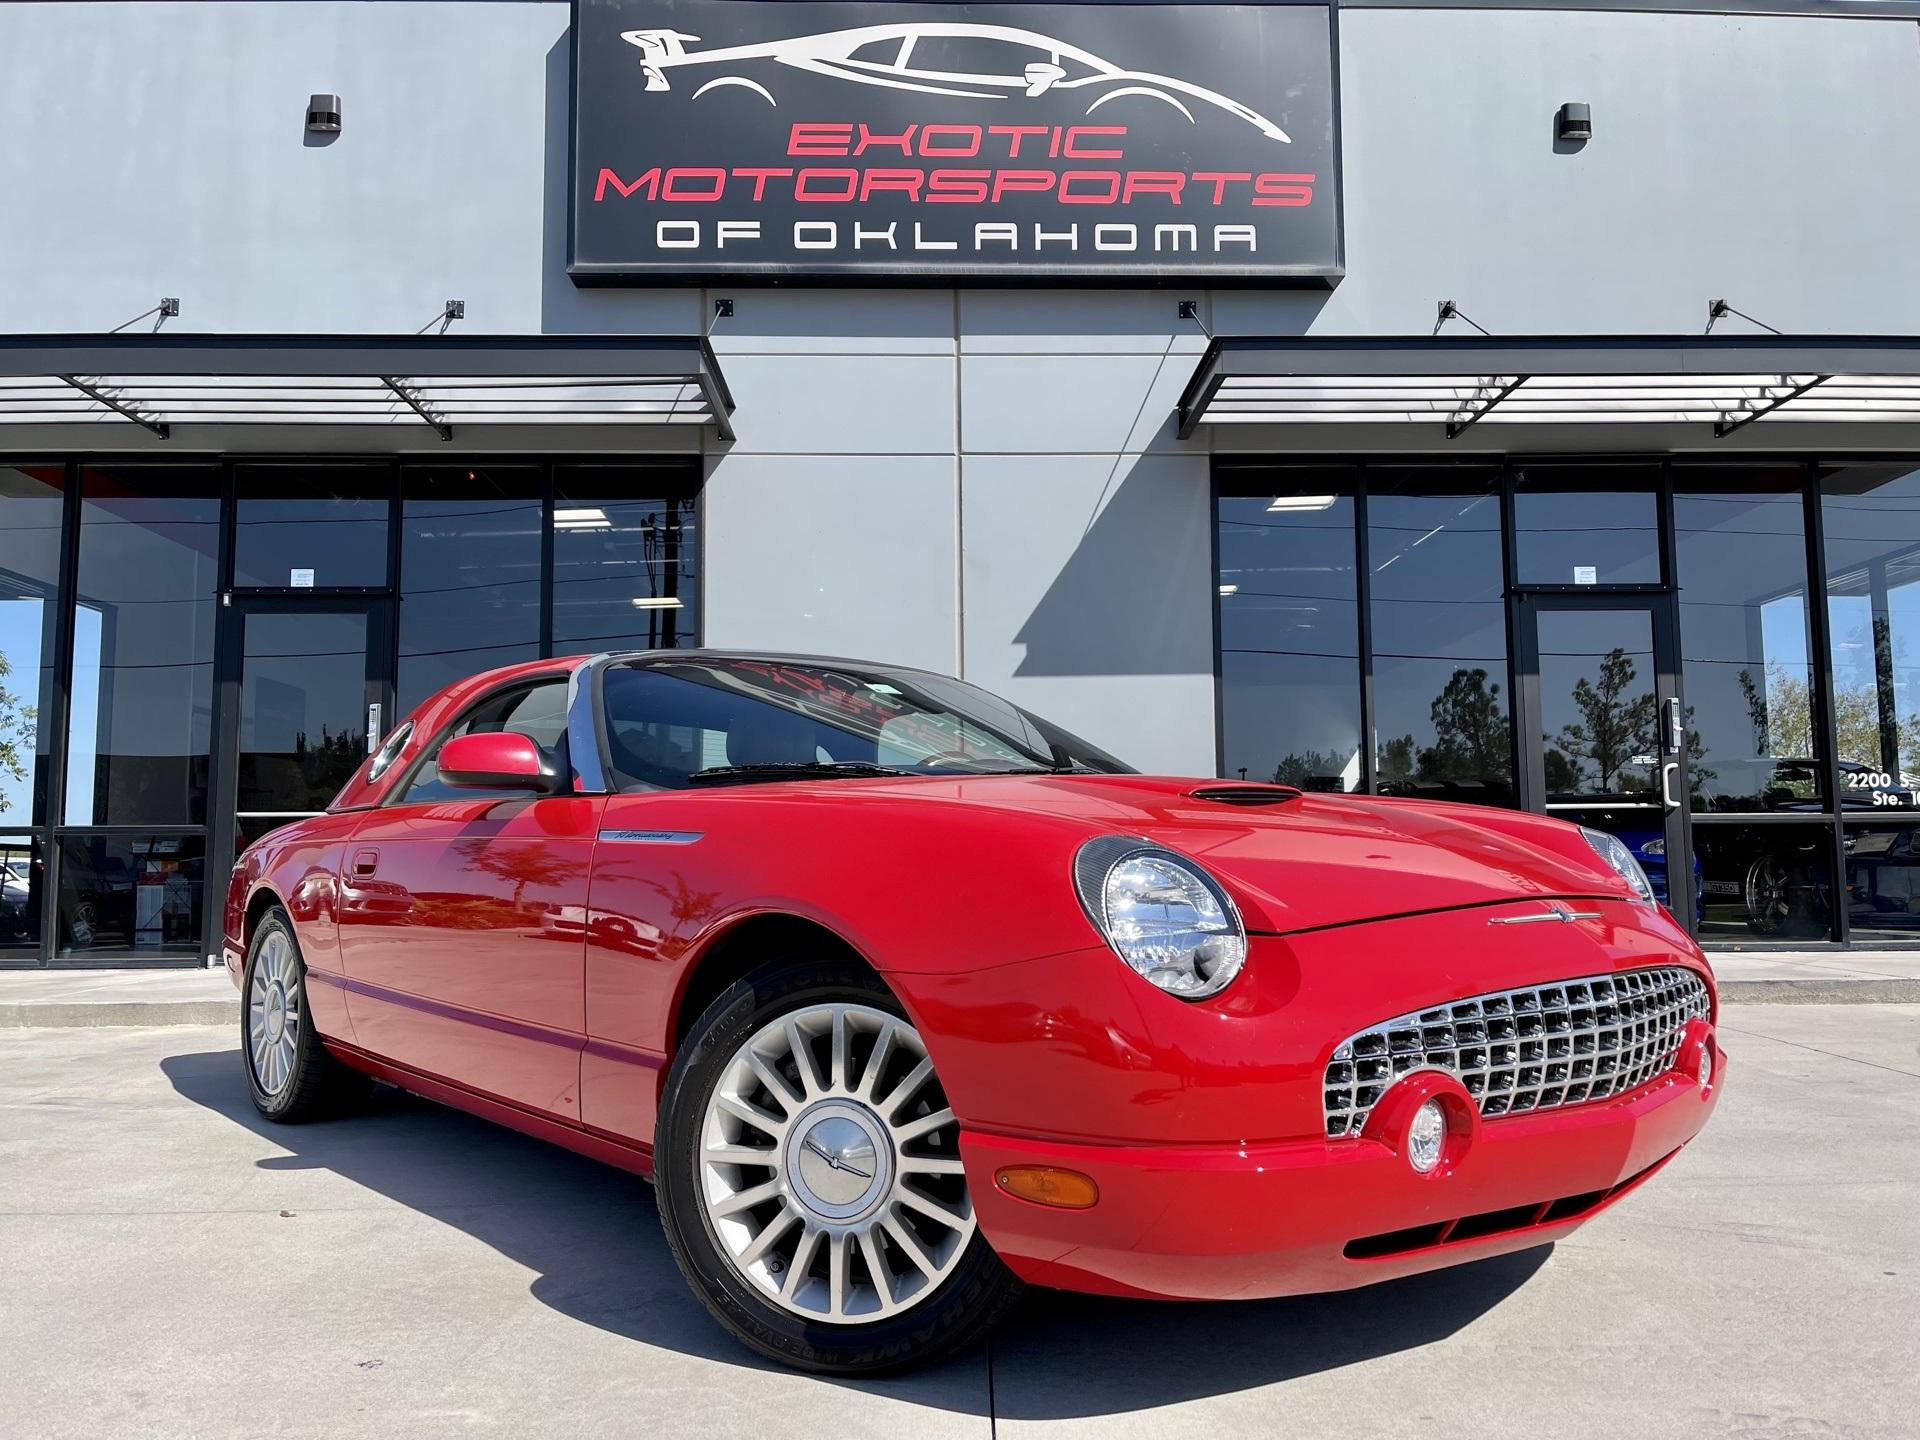 Used 2005 Ford Thunderbird 50th Anniversary Edition W/Hardtop Included